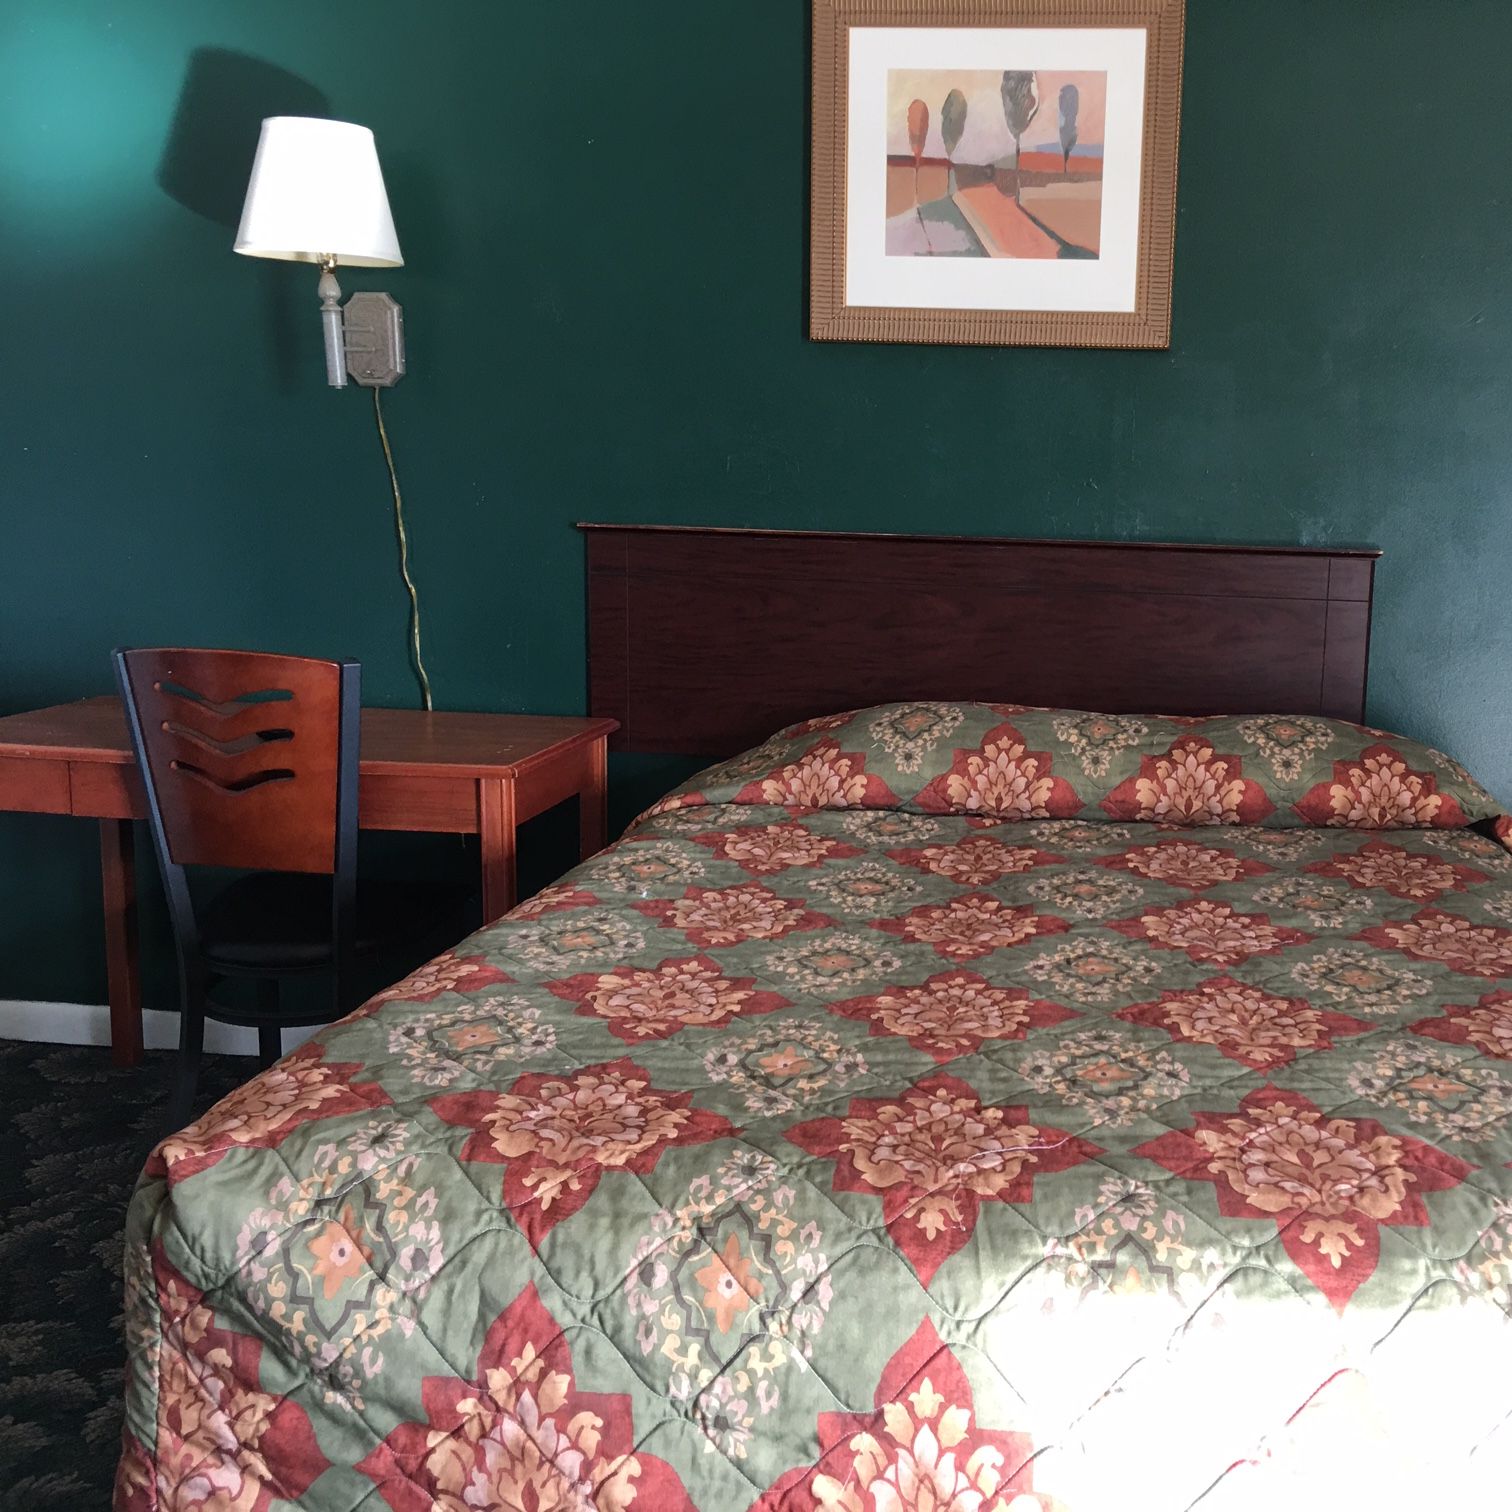 Motels With Wifi in Dodge City, Kansas